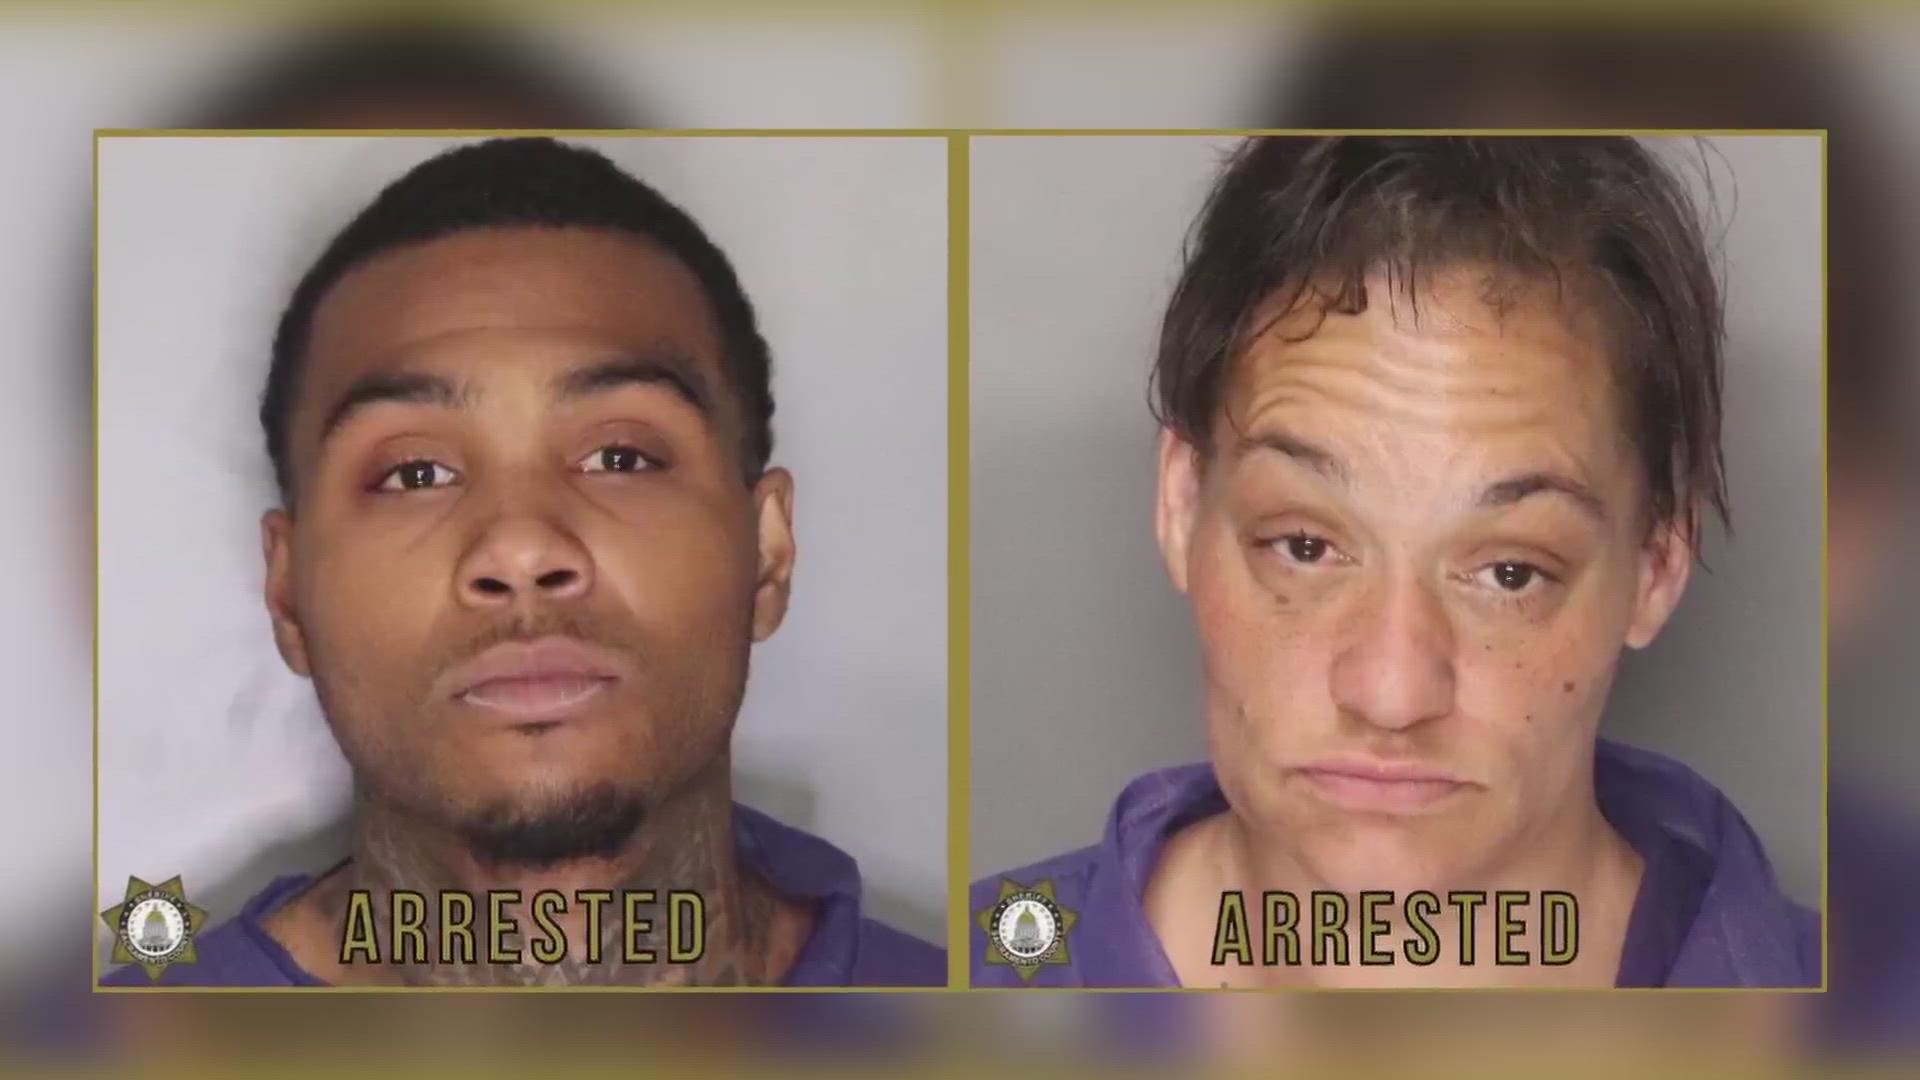 The Sacramento County Sheriff's Office announced Traydeon Jamarr Holmes and Monique Renee Moore were arrested in connection to the crime.